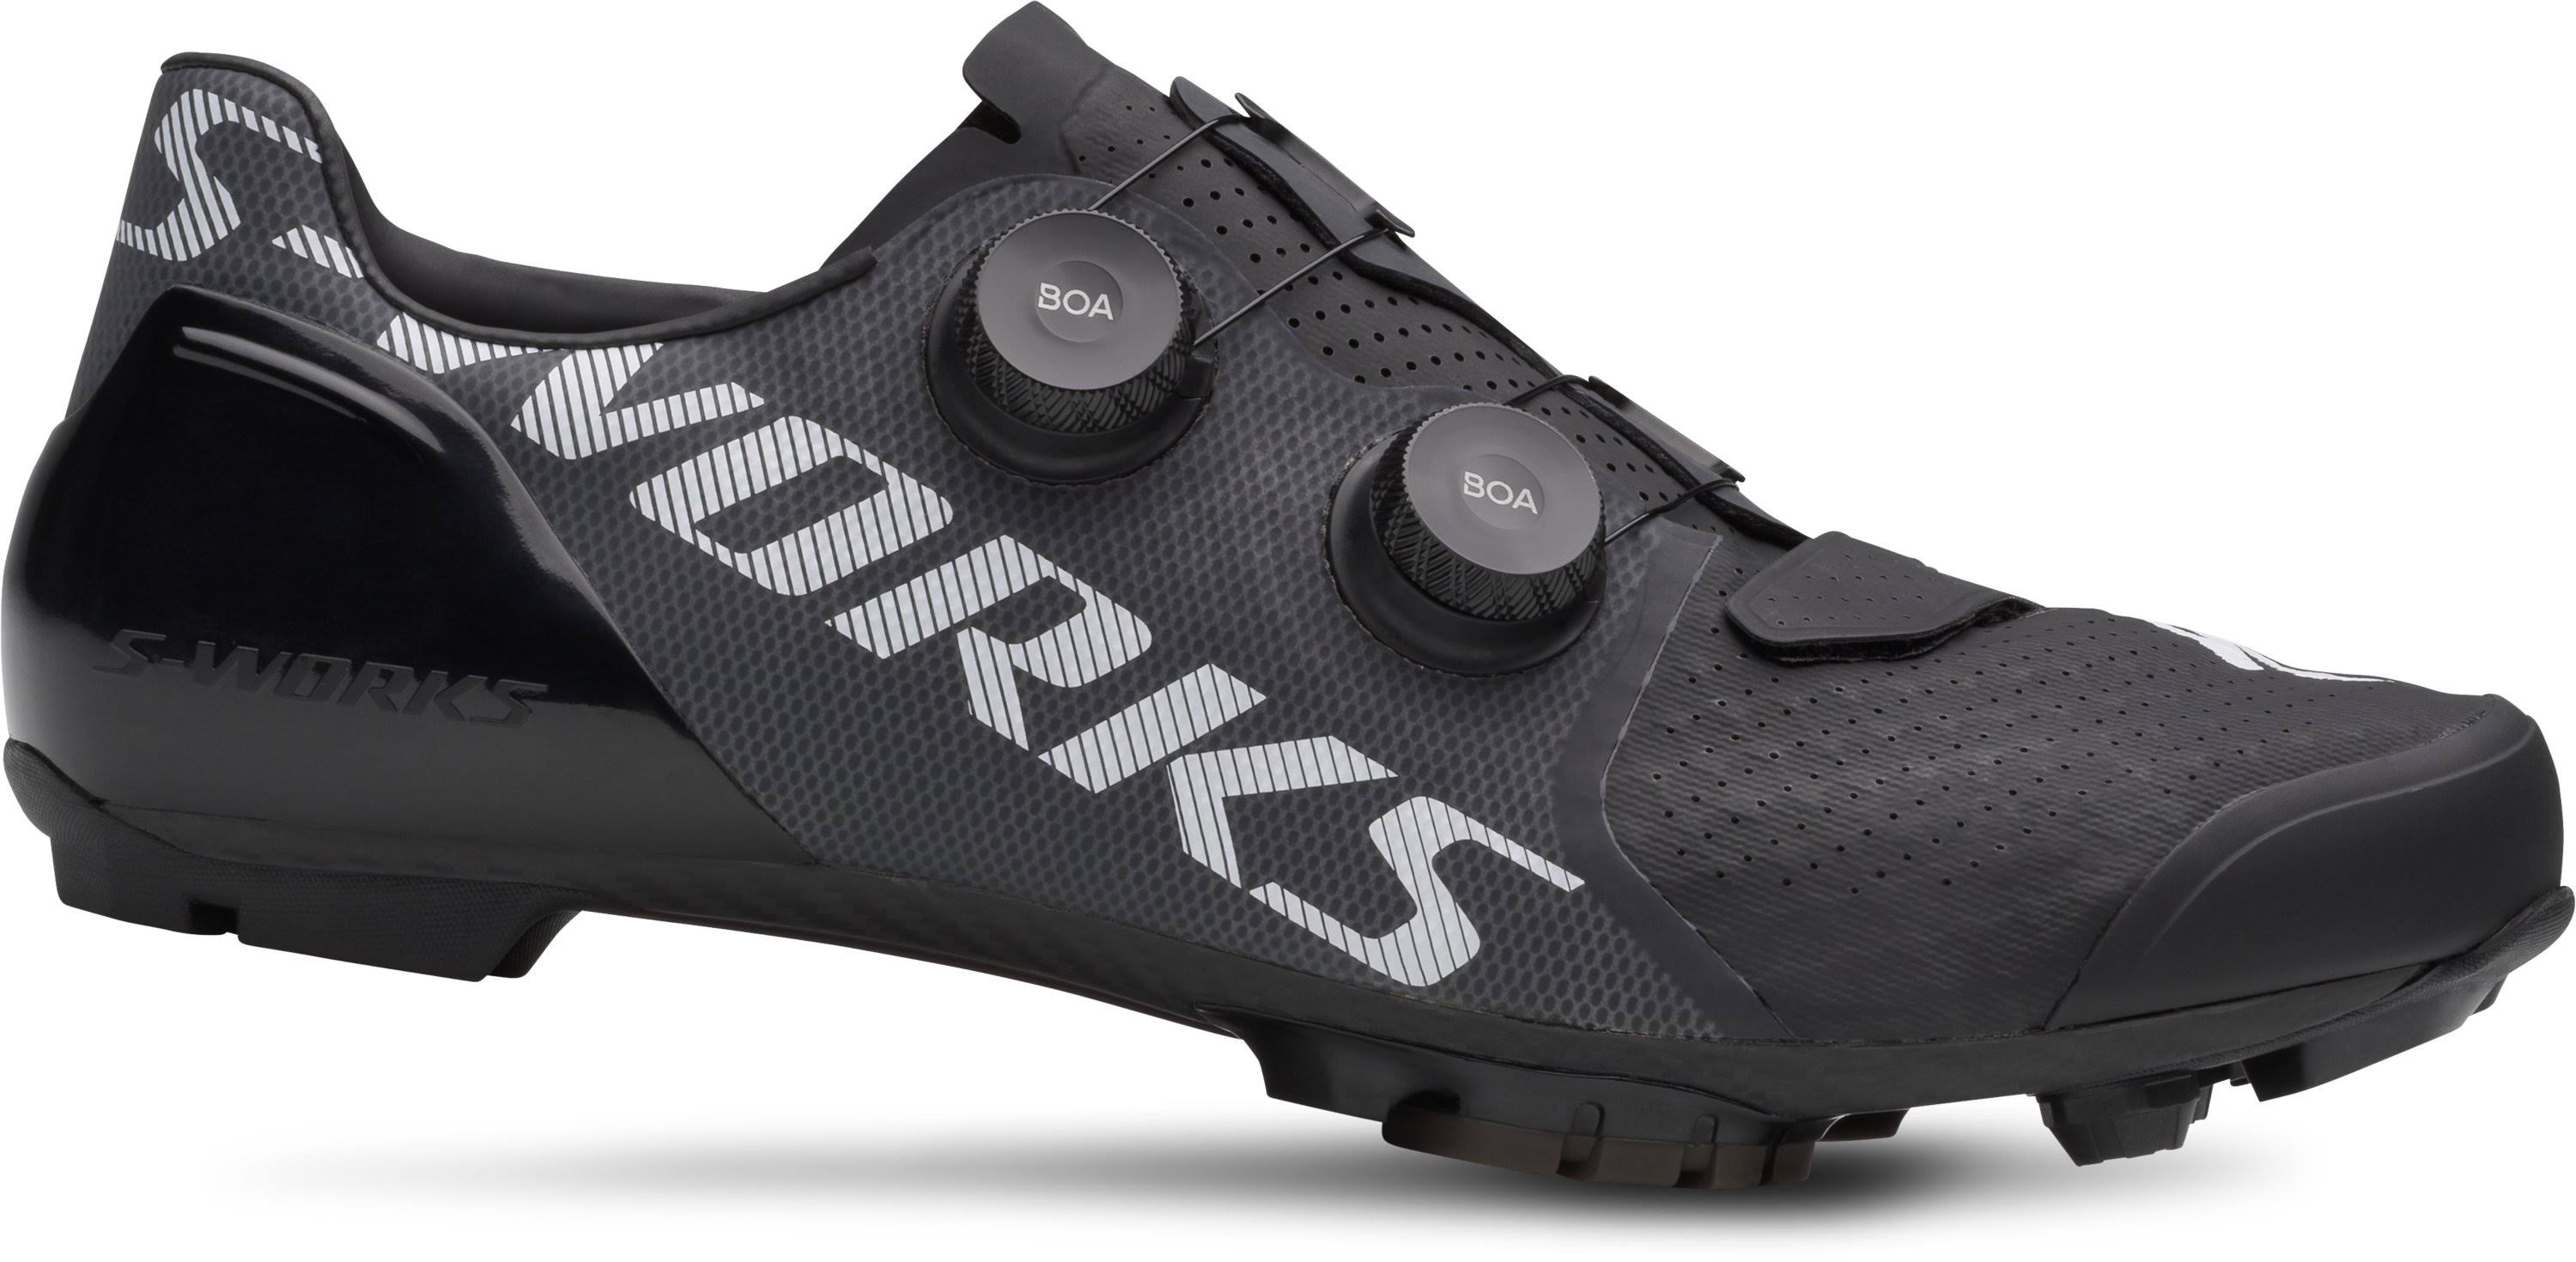 S-Works Recon Shoes 46.5 Black